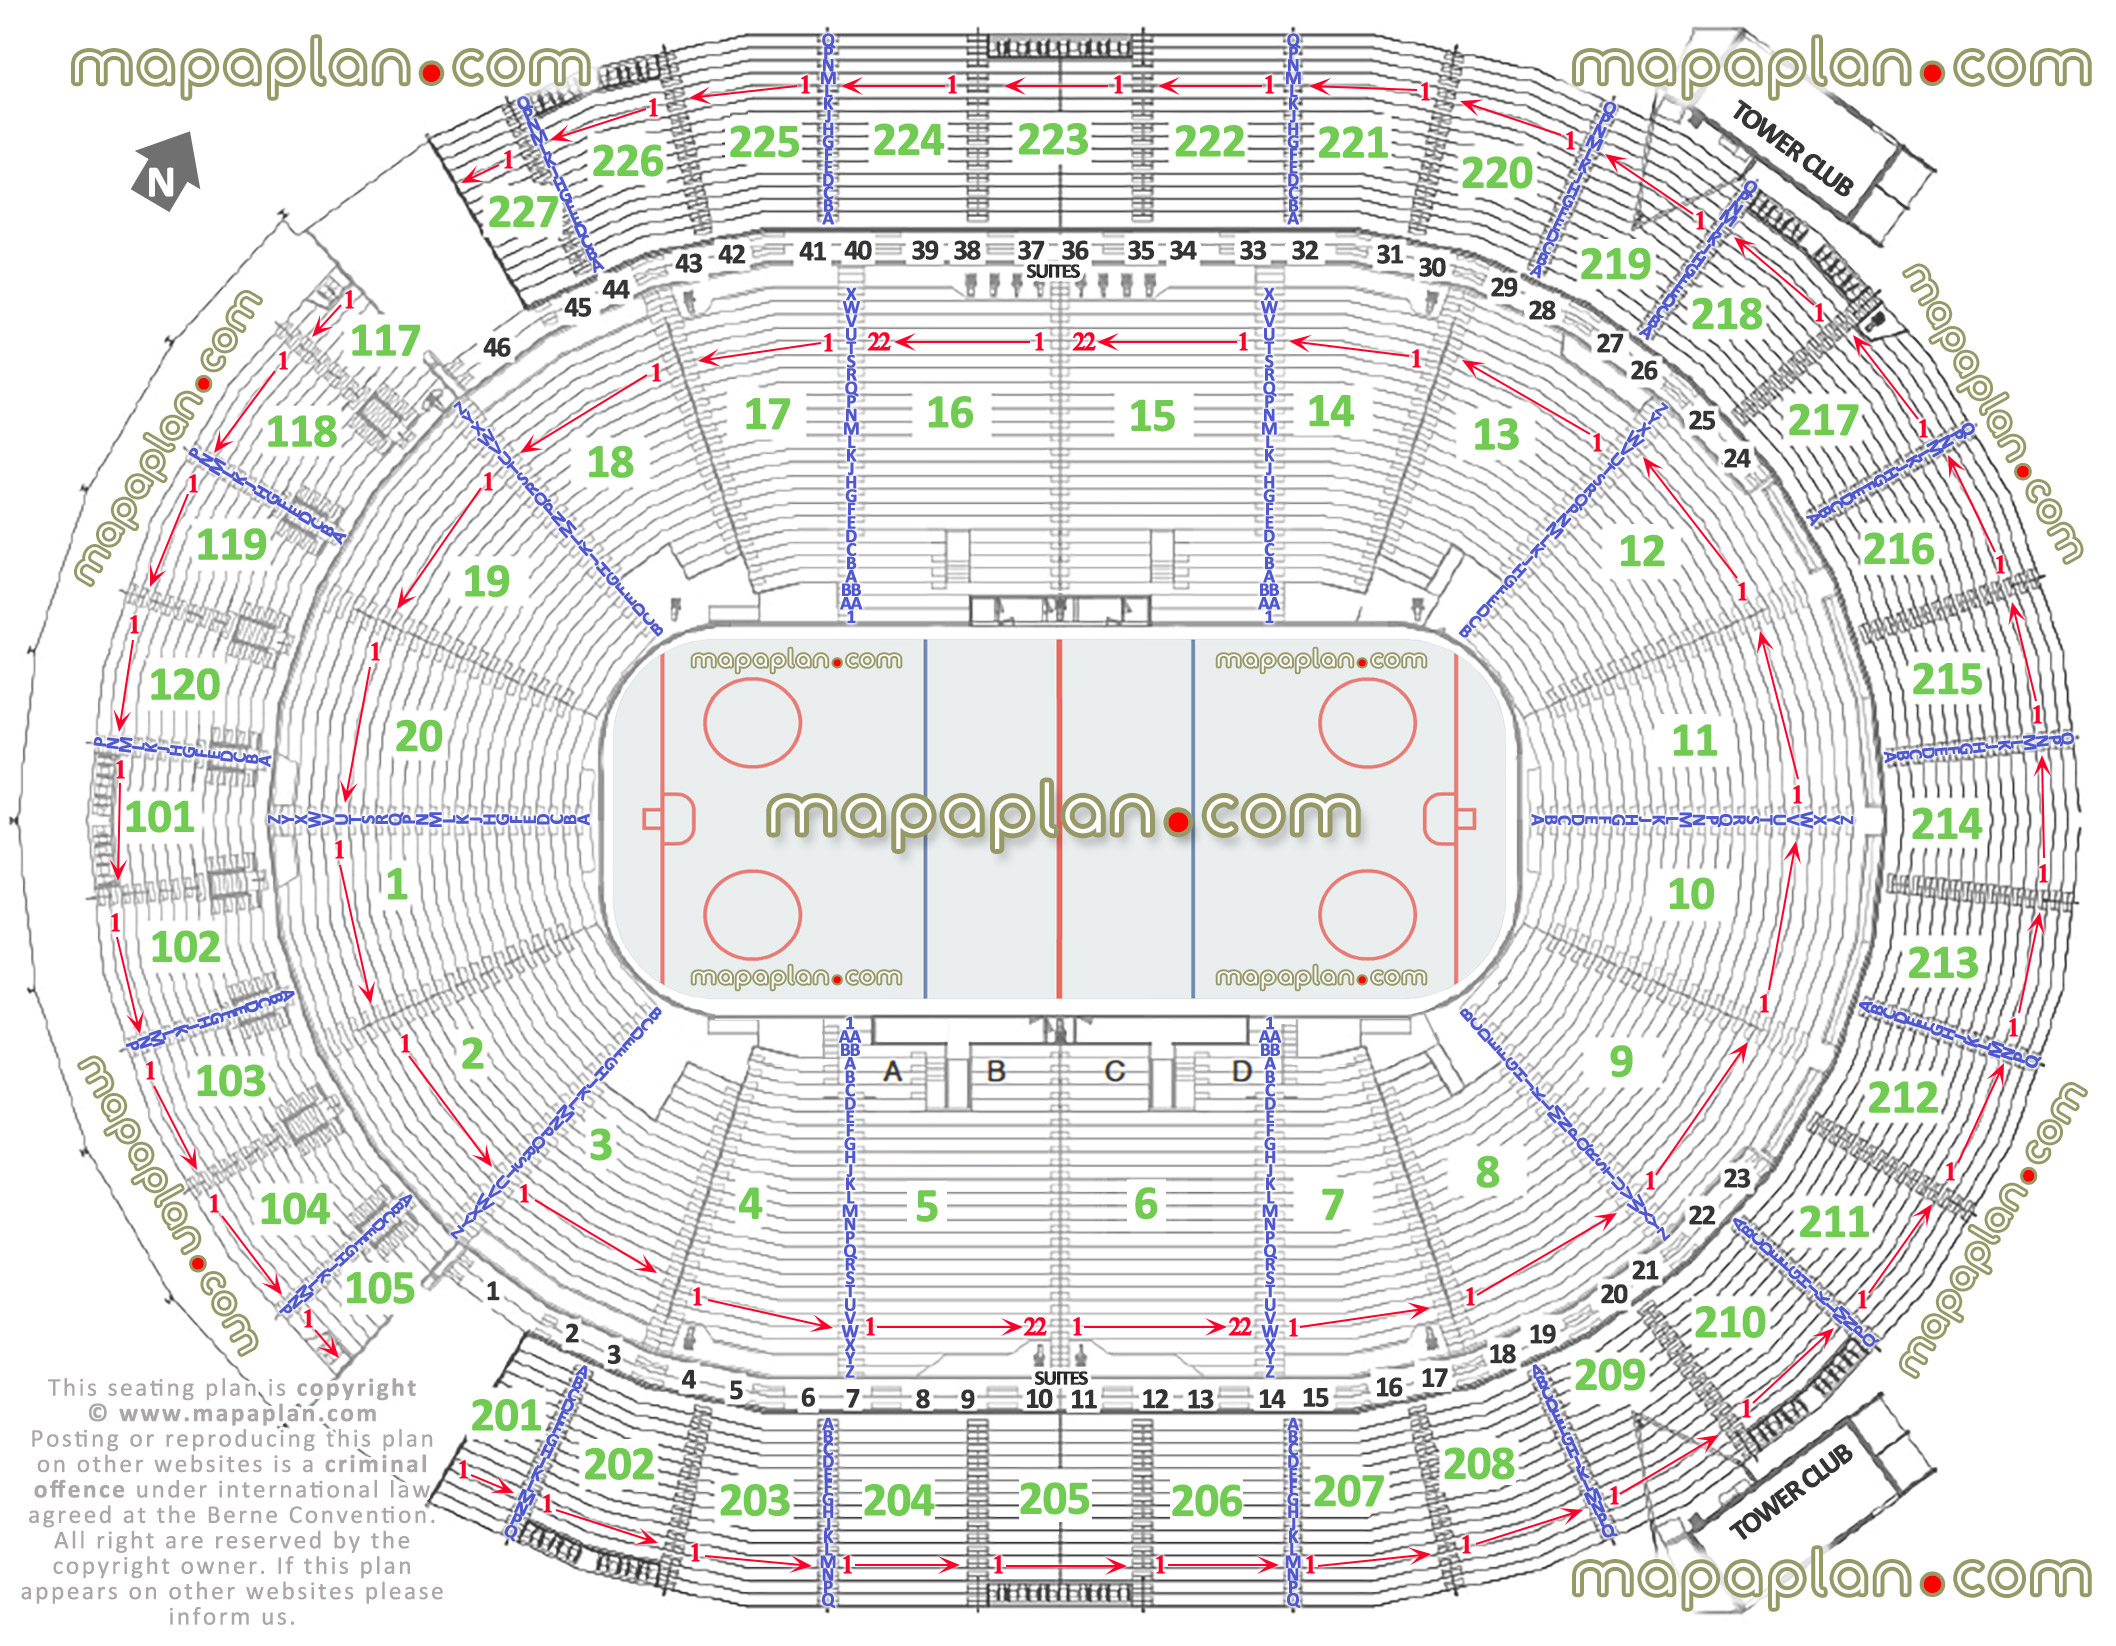 ice hockey games las vegas nv usa detailed seating capacity arrangement nhl arena row numbers layout lower upper level lounges main entrance gate exits map west east south north detailed fully seated chart setup standing room only sro areas wheelchair disabled handicap accessible seats plan Las Vegas T-Mobile Arena Las Vegas T-Mobile Arena seating chart